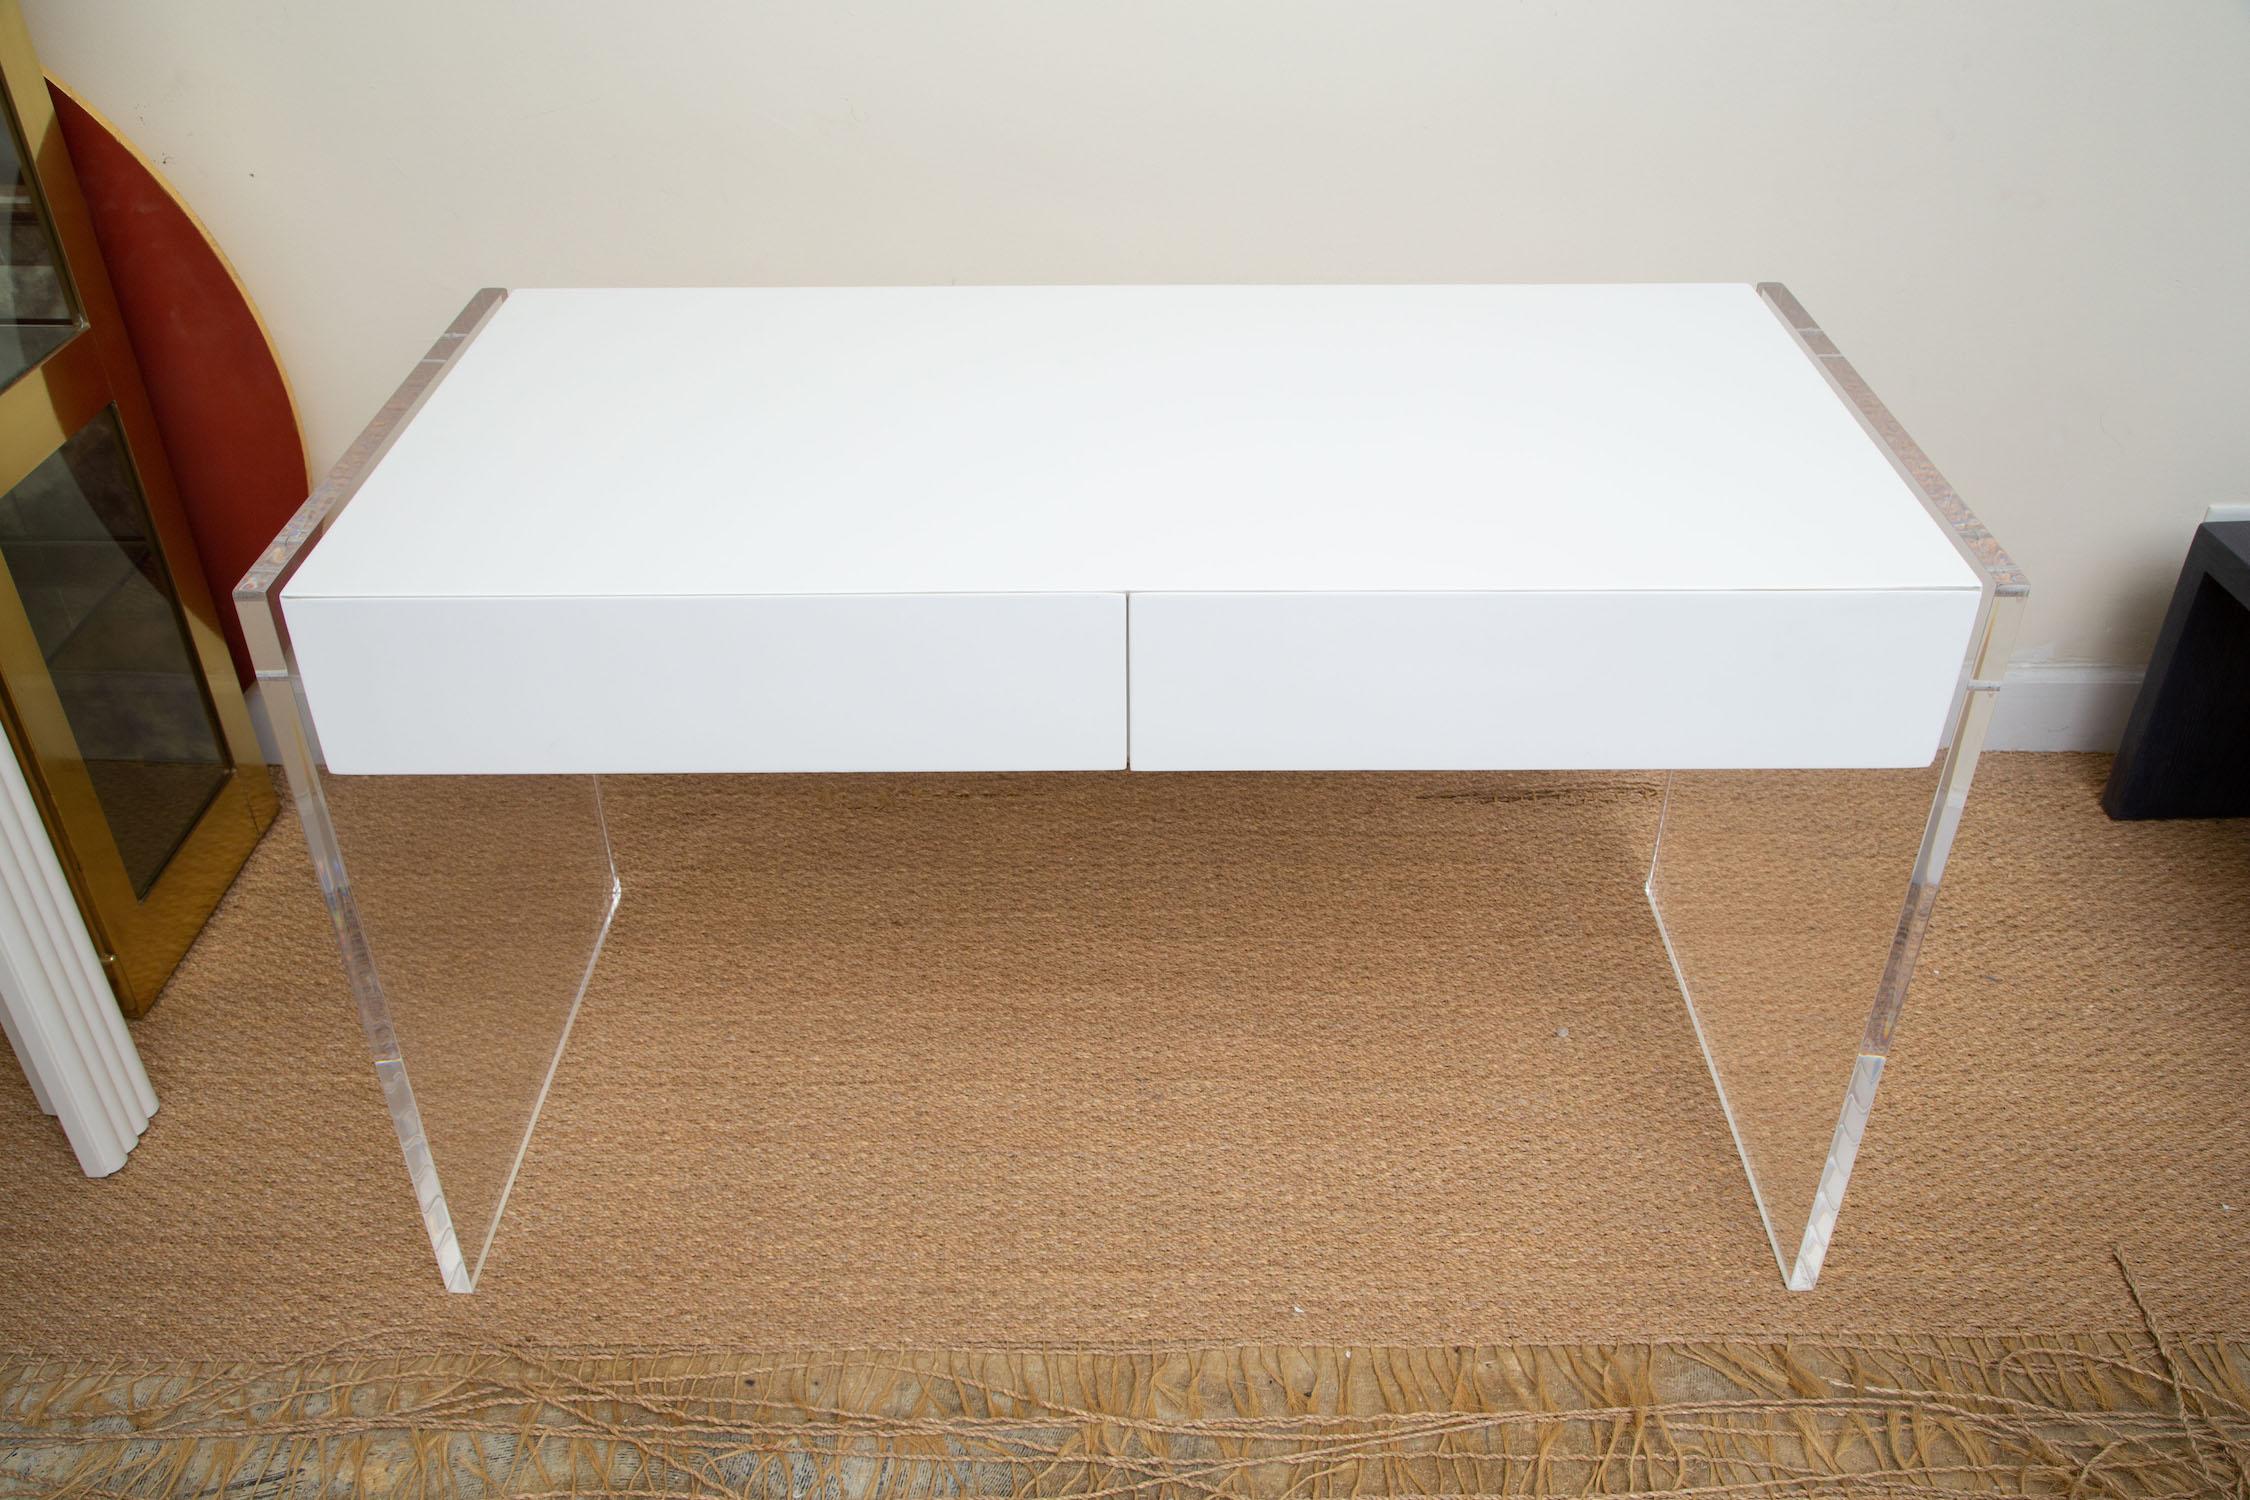 This white lacquered over wood desk and or vanity has end thick lucite panels with allen screws to put together. It has 2 large drawers. This was a small production piece. The lucite panels or sides at the ends are 1 Inch thick. The size is perfect